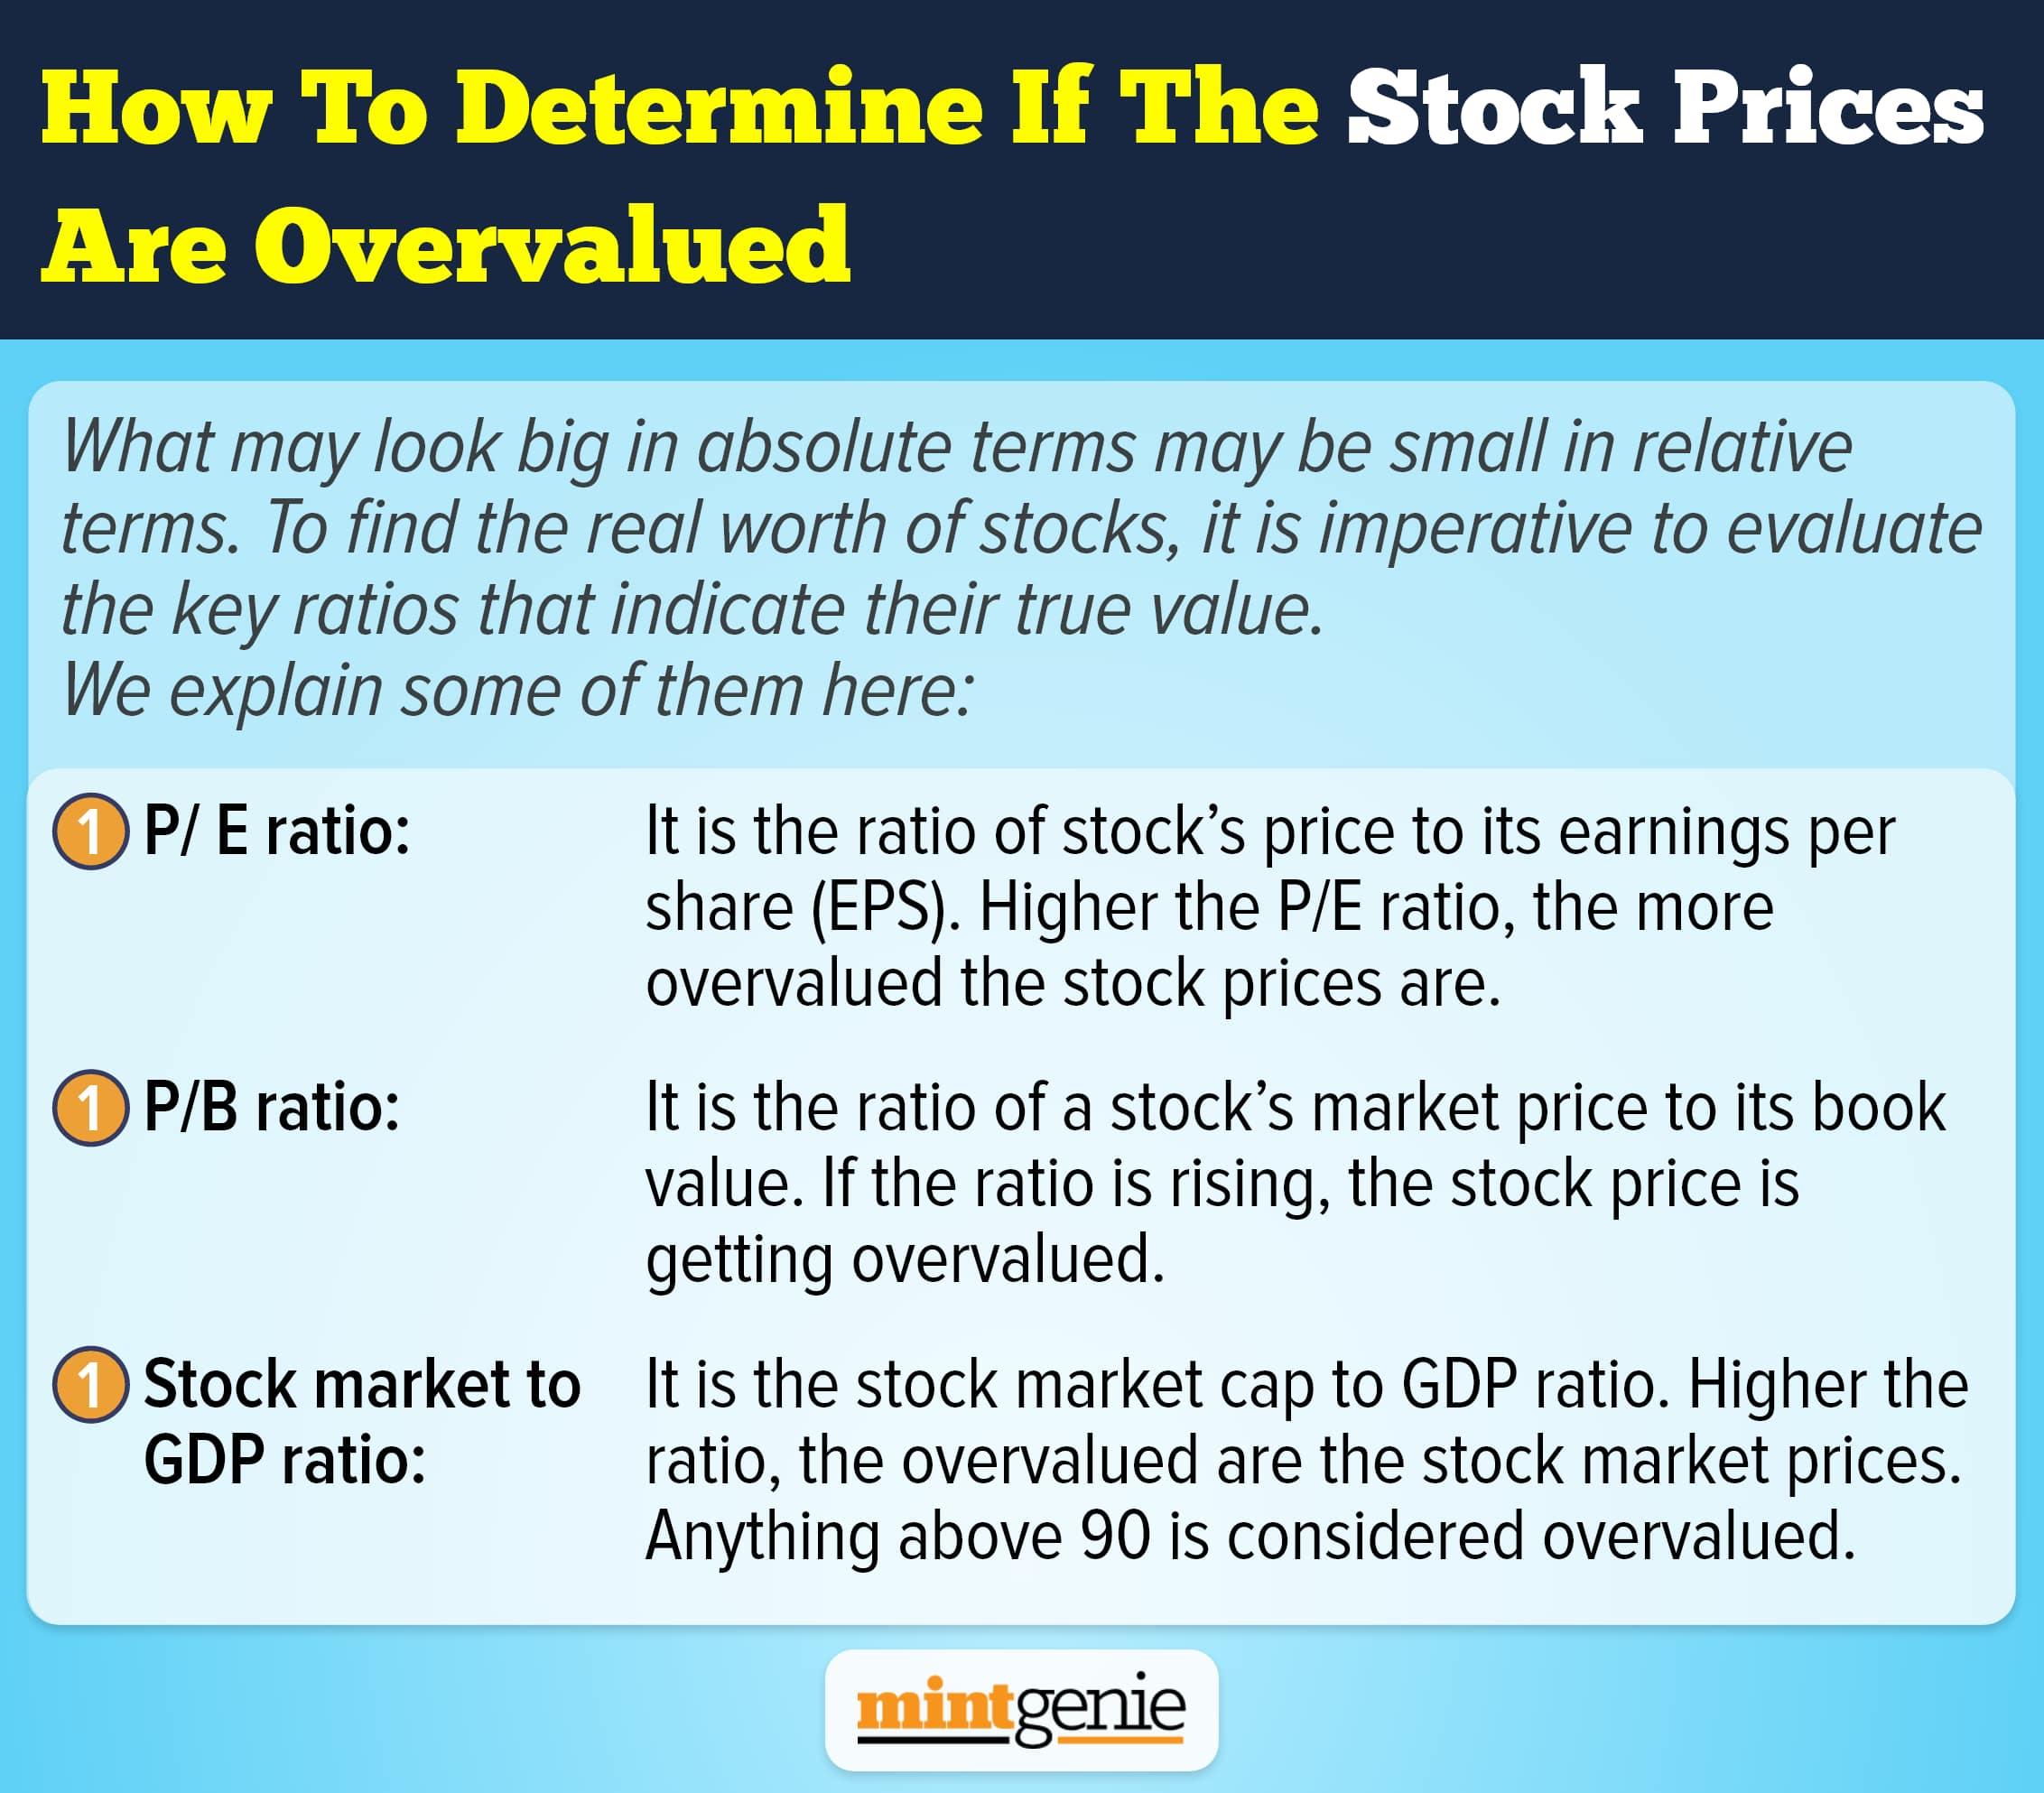 How to determine if the stock market prices are overvalued?